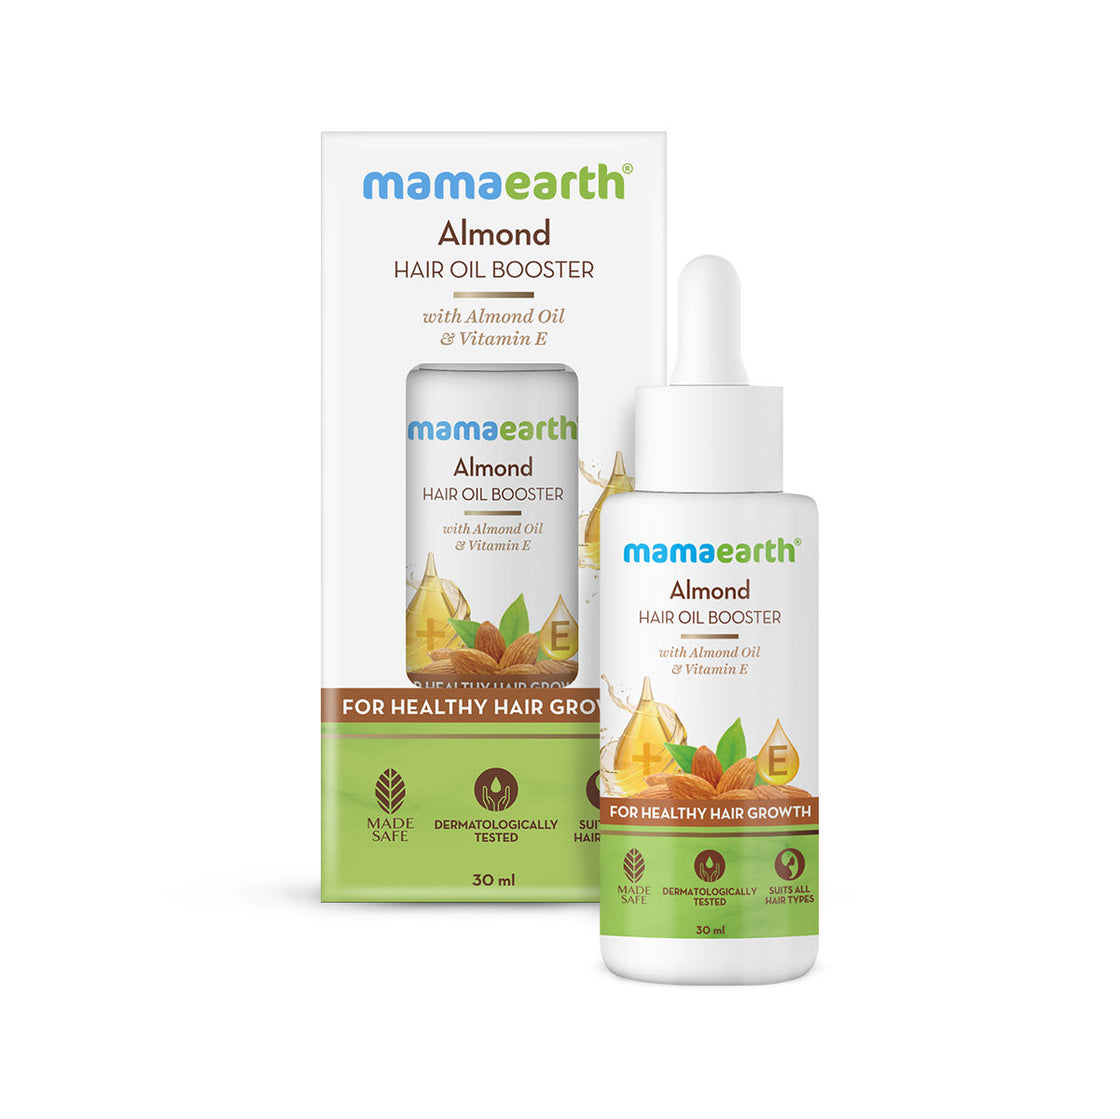 Mamaearth Almond Hair Oil Booster With Almond Oil & Vitamin E & For Healthy Hair Growth-7